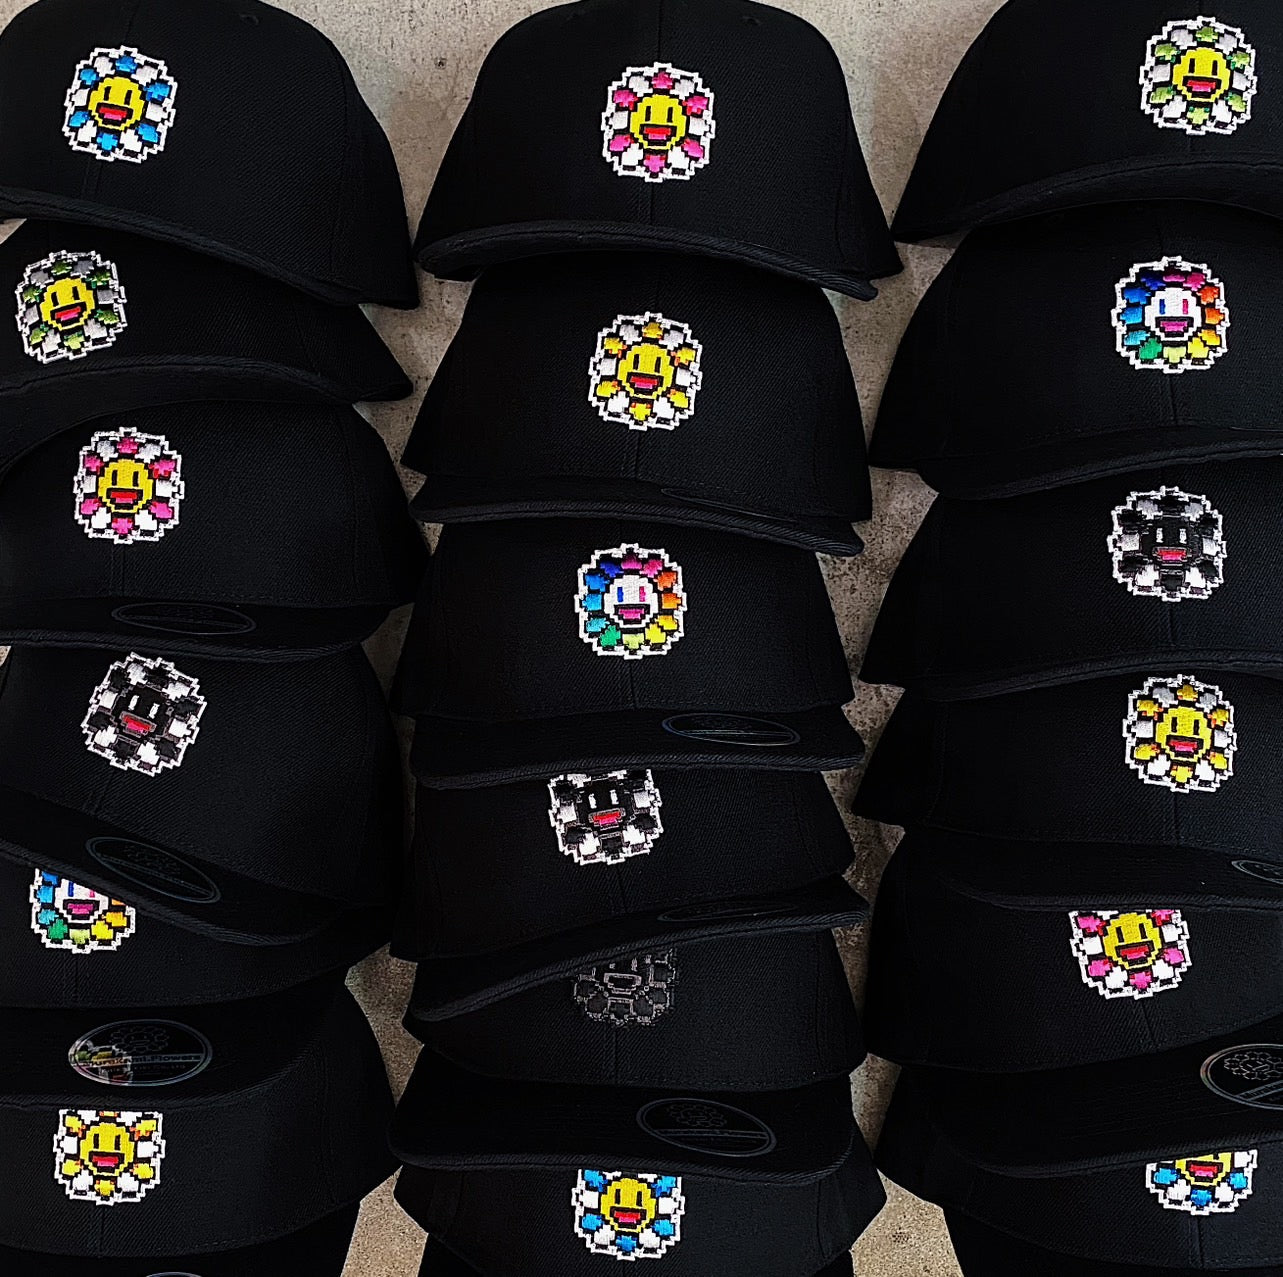 【©Takashi Murakami / kaikai kiki】<br> A new color has been added to the popular “Murakami.Flowers” ​​series cap, and it will be on sale online from 20:00 today, August 7 (Monday)!